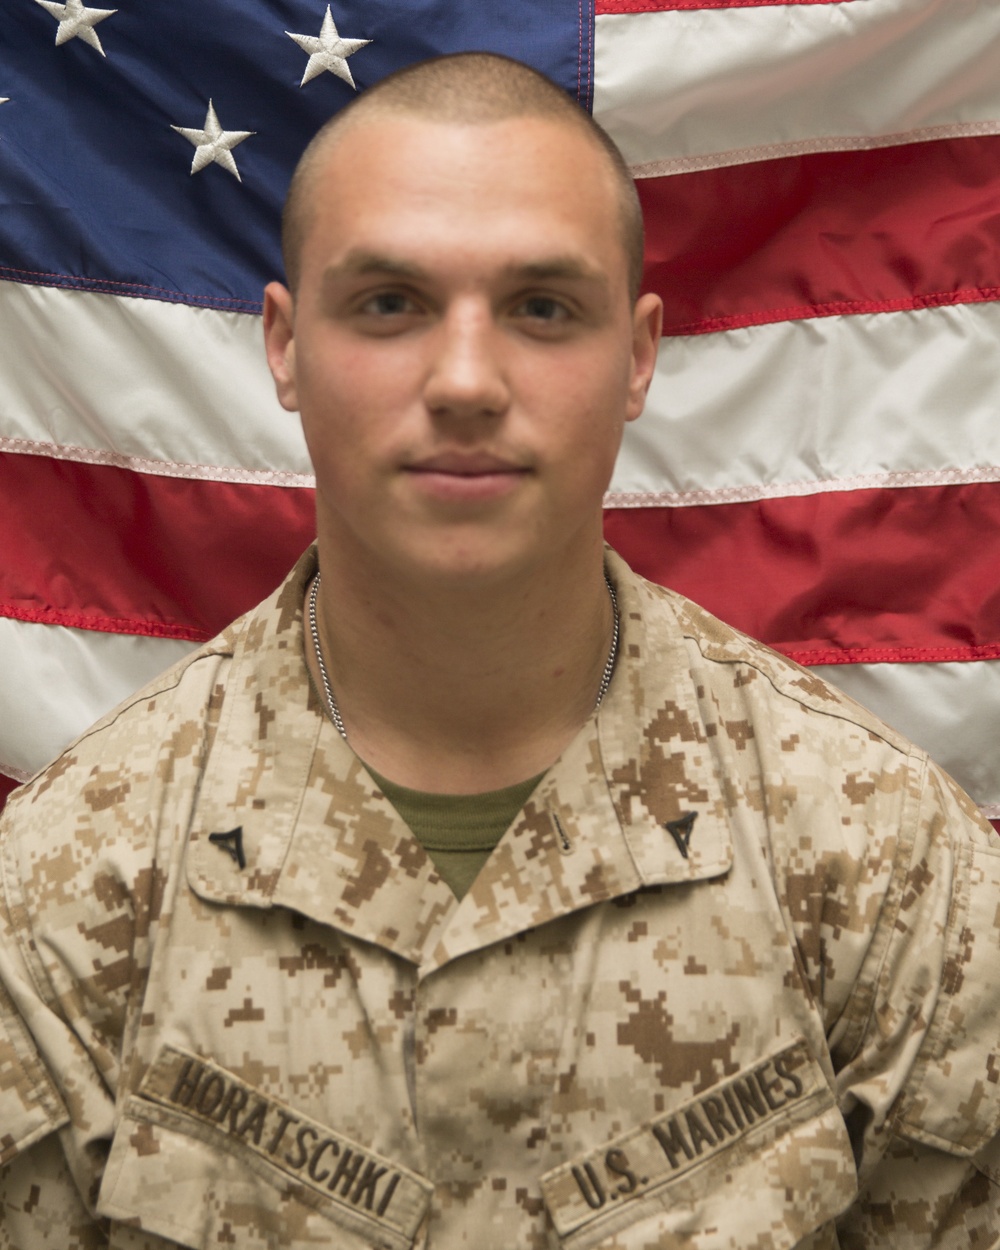 Illinois native serving with the 24th MEU